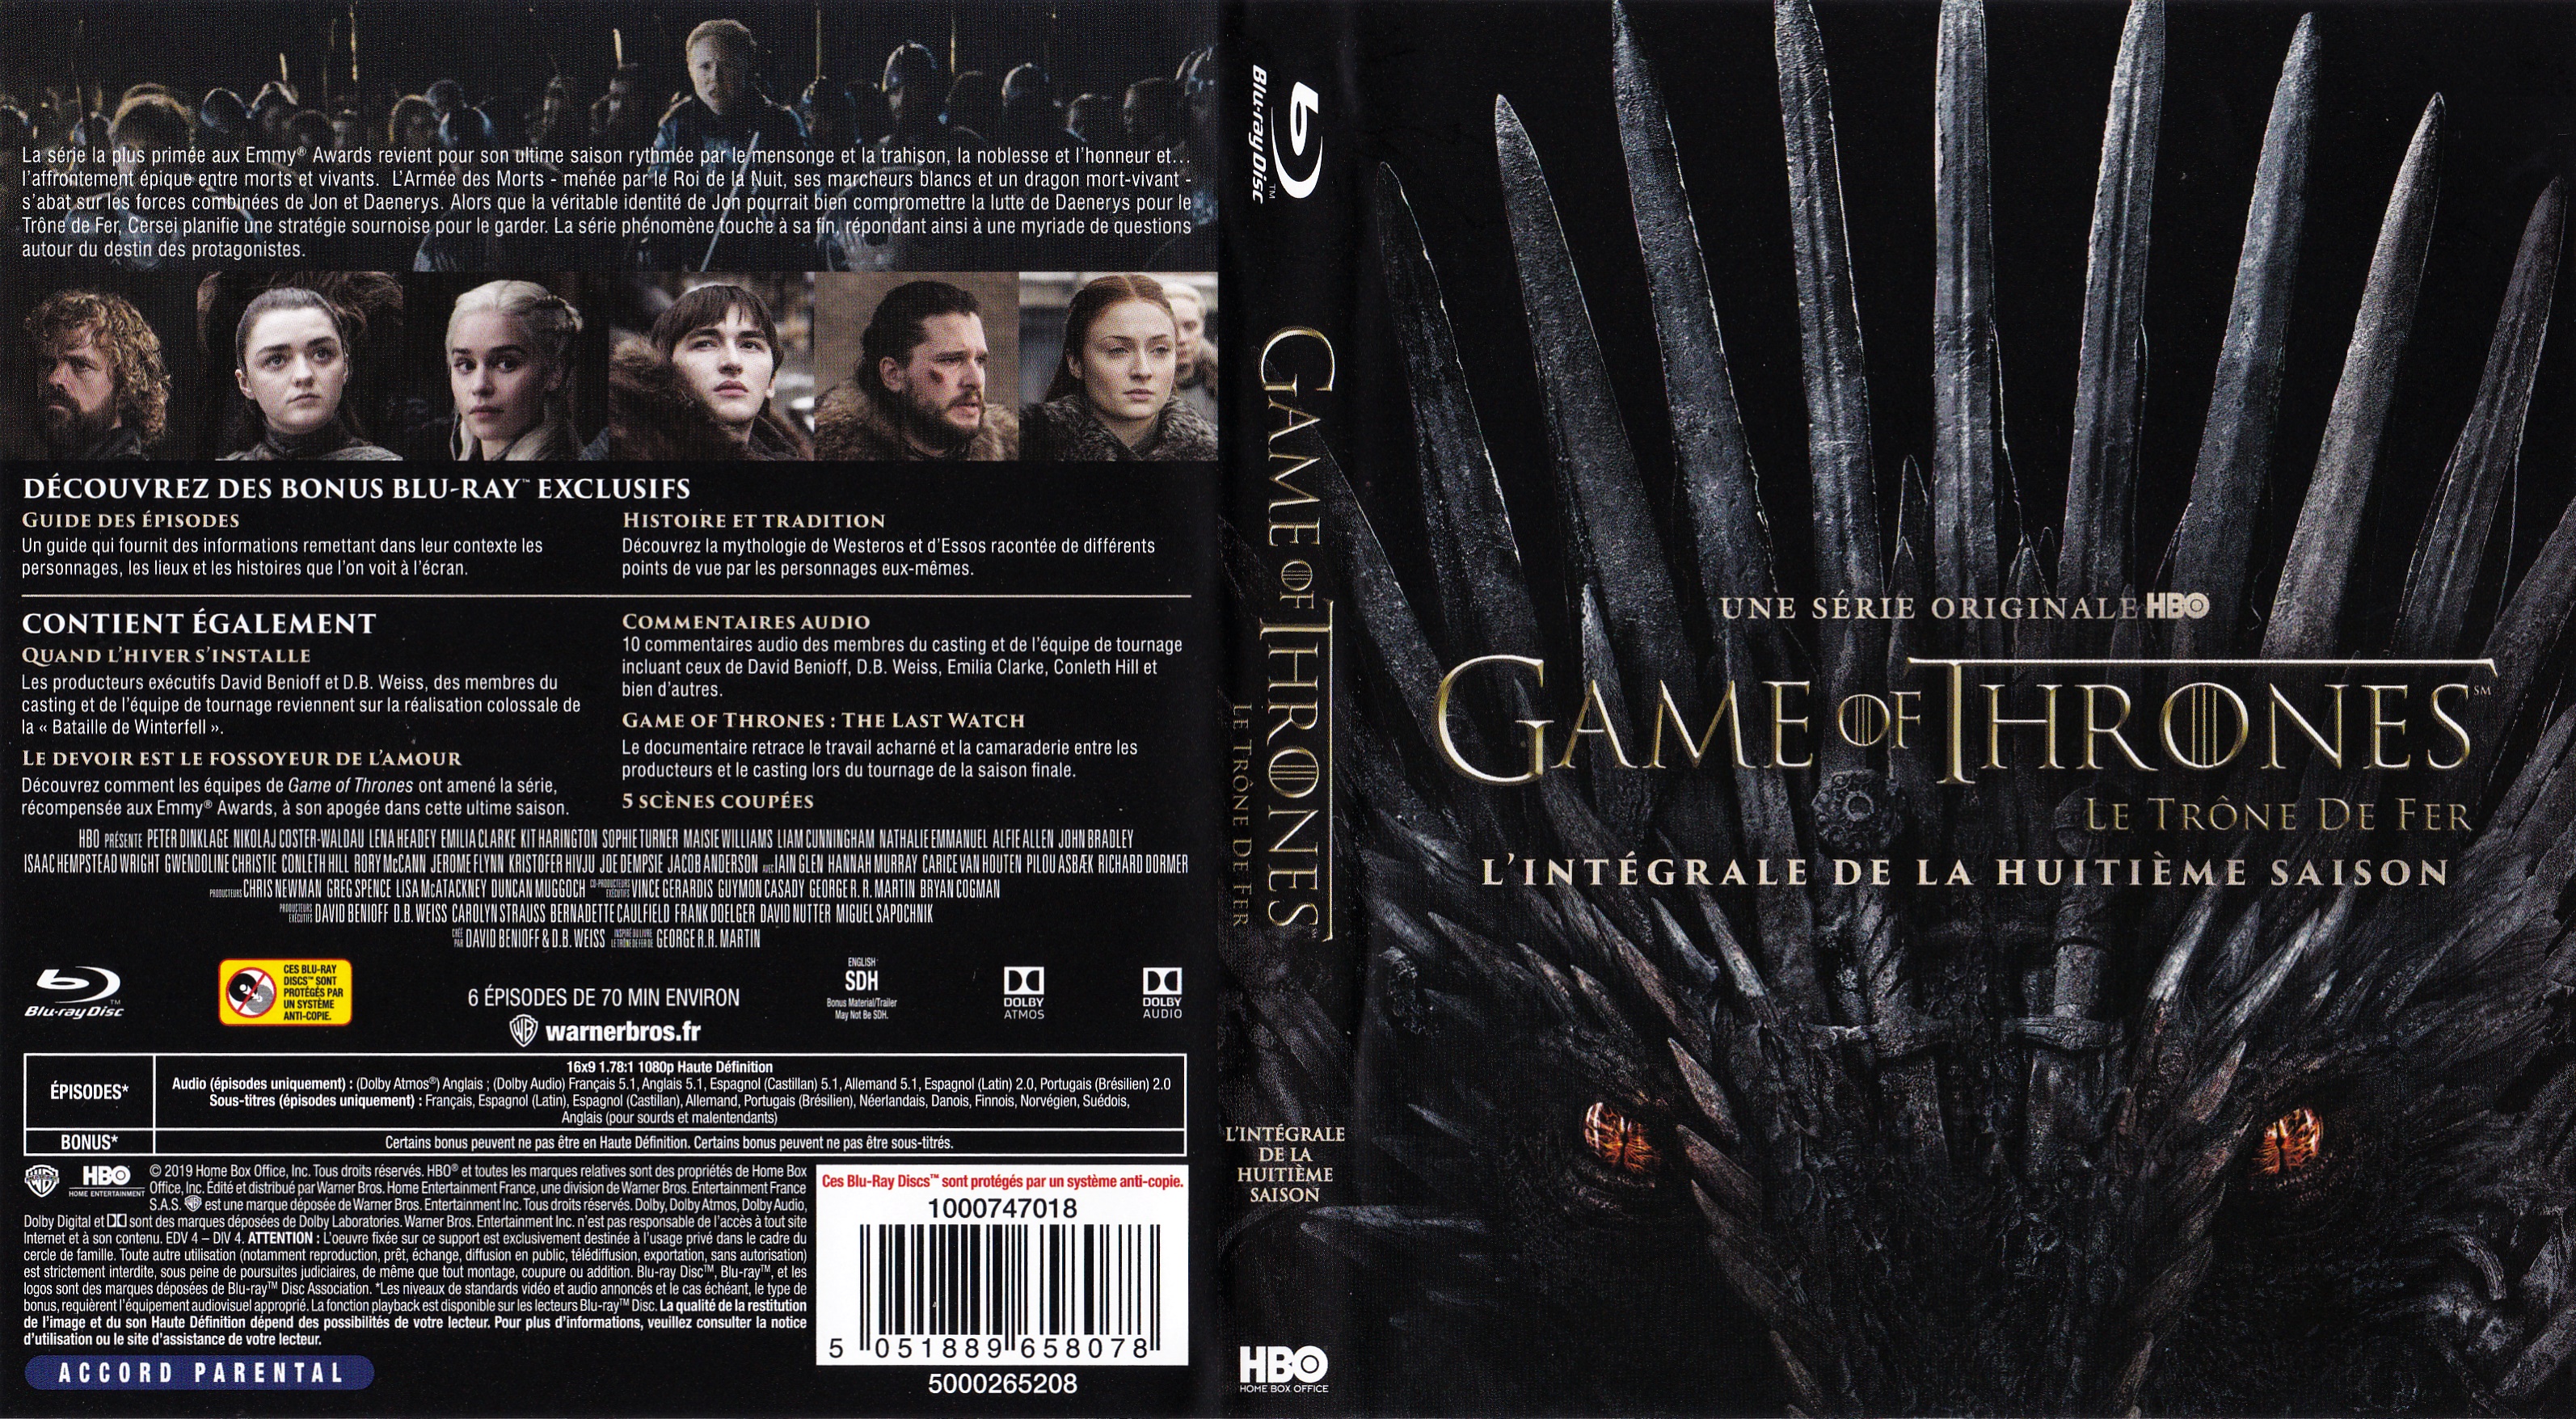 Jaquette DVD Game of thrones Saison 8 (BLU-RAY)